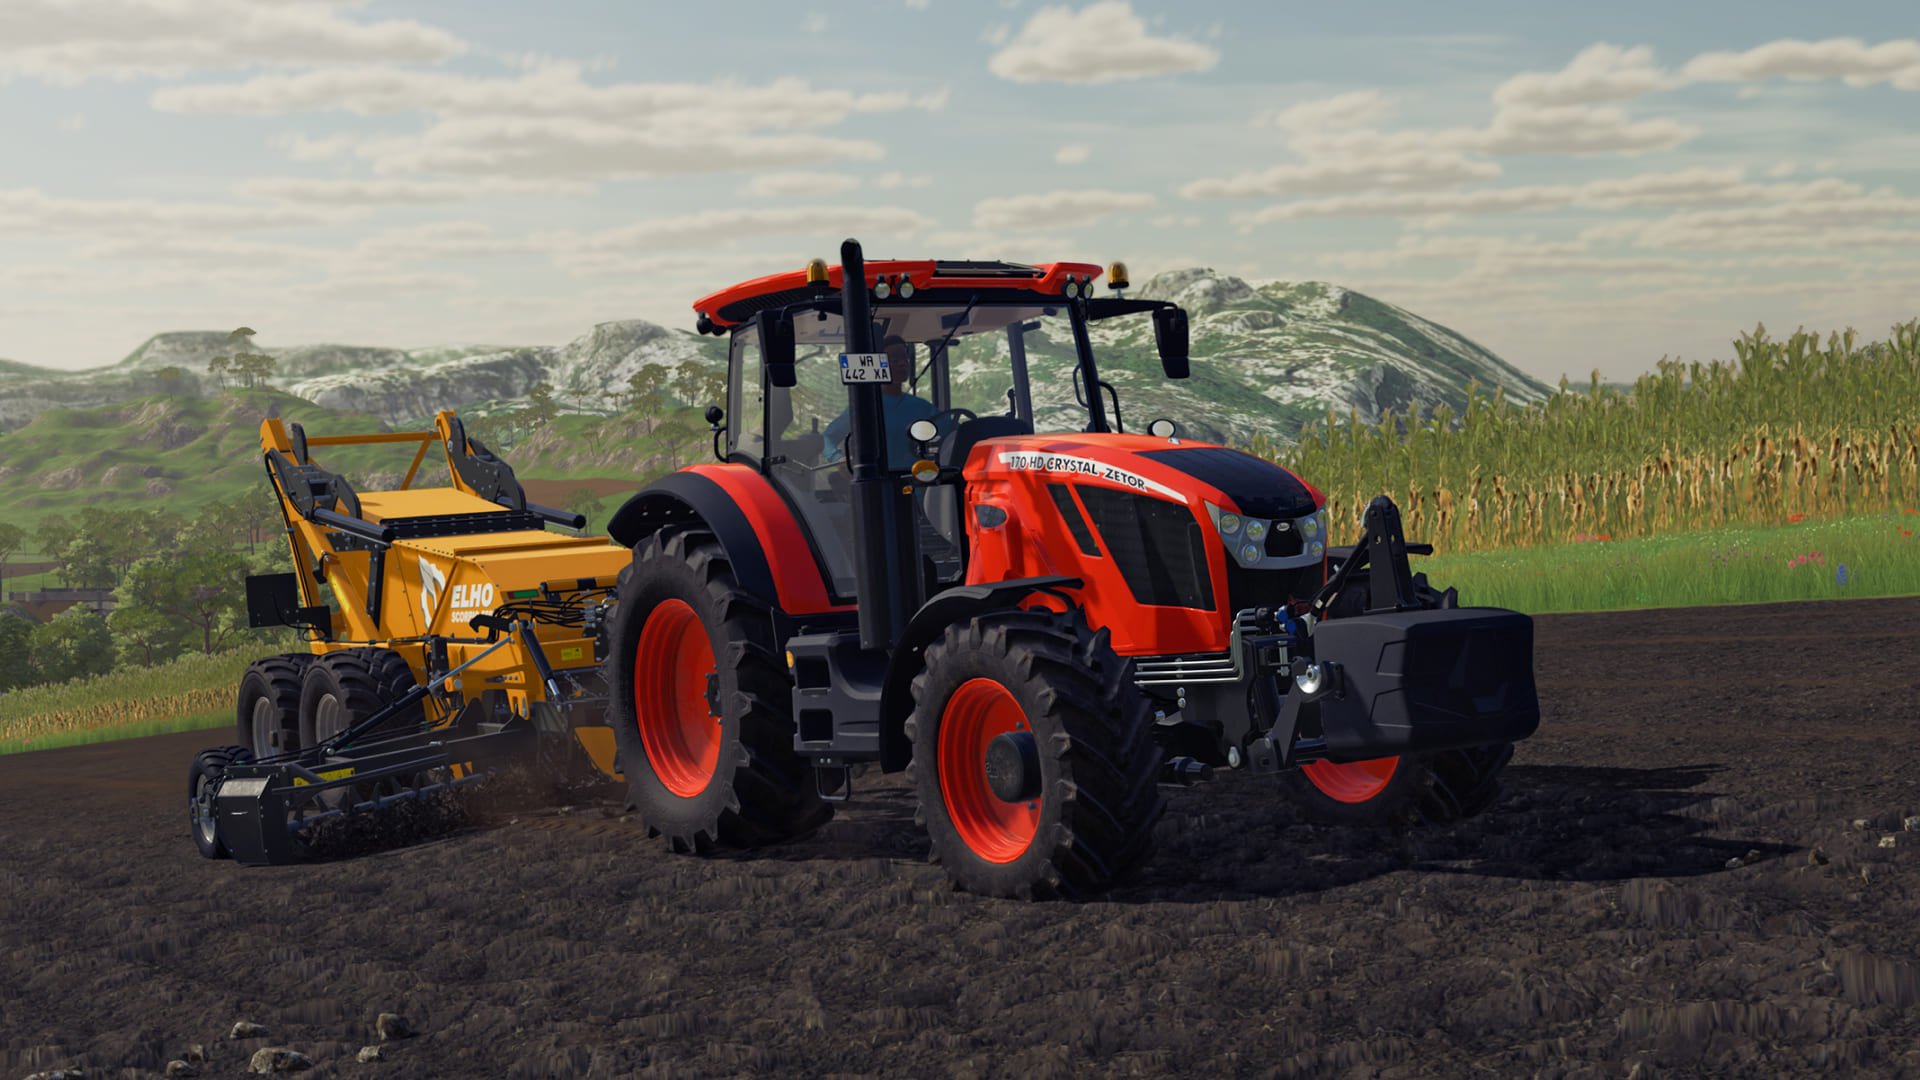 Farming Simulator 22 and mods: how many slots on the PS4, Xbox One, PS5 and  Xbox Series S / X consoles?